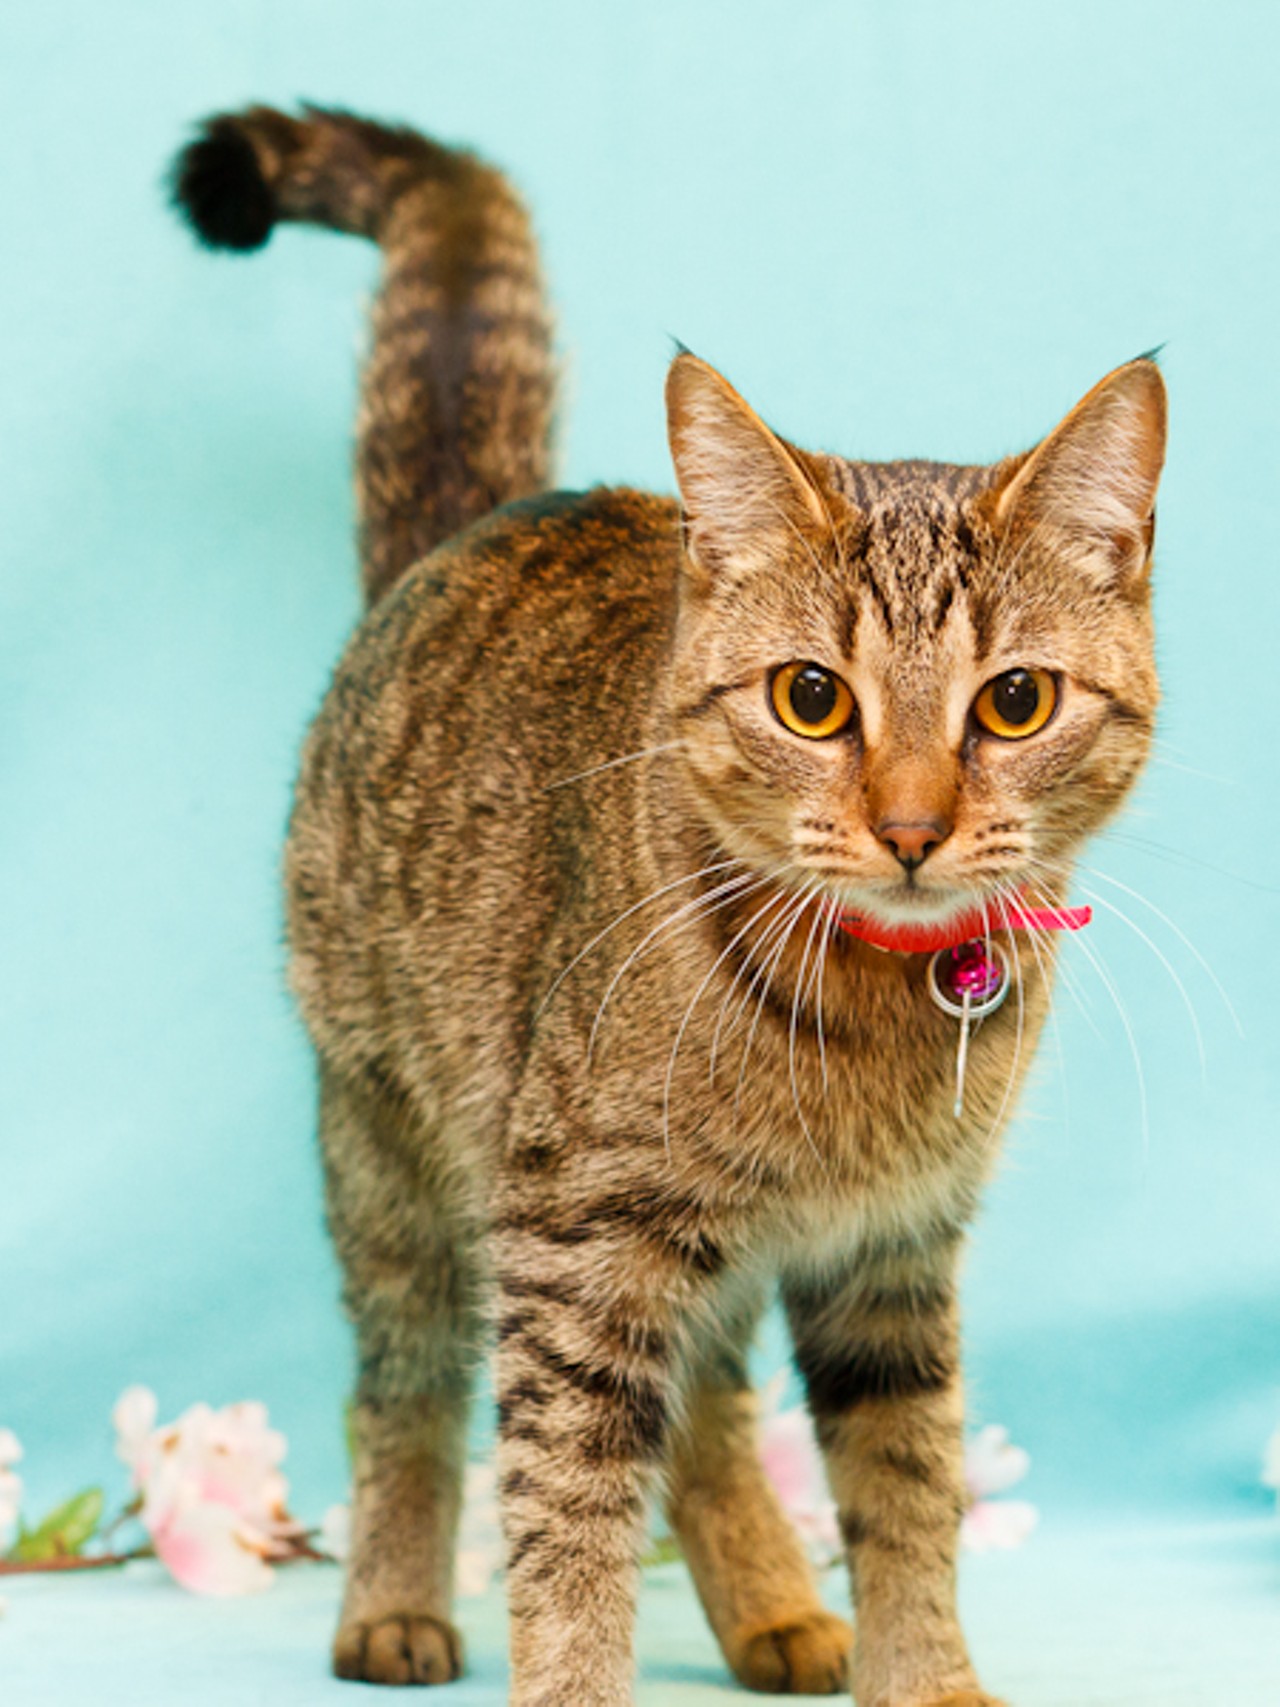 NAME:Lilly 
GENDER: Female
BREED: Domestic Short Hair
AGE: 6 years, 3 months
WEIGHT: 9 pounds
SPECIAL CONSIDERATIONS: Lilly and Nutmeg are a bonded pair, meaning  they must be adopted together. 
REASON I CAME TO MHS: Owner surrender
LOCATION: Rochester Hills Center for Animal Care
ID NUMBER: 747147